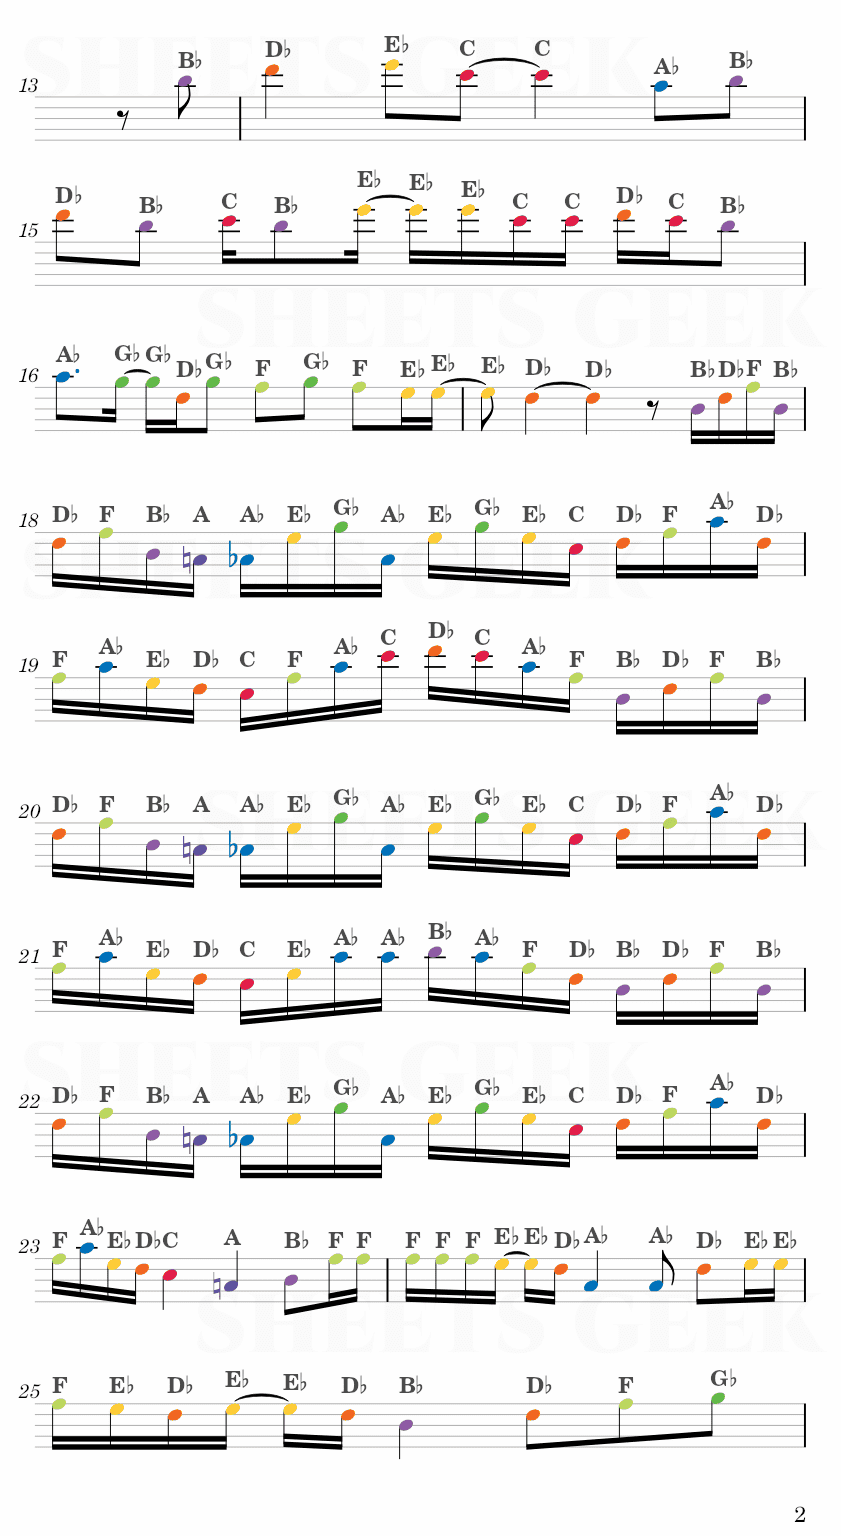 It's Been So Long - Five Nights at Freddy's 2 Song Easy Sheet Music Free for piano, keyboard, flute, violin, sax, cello page 2